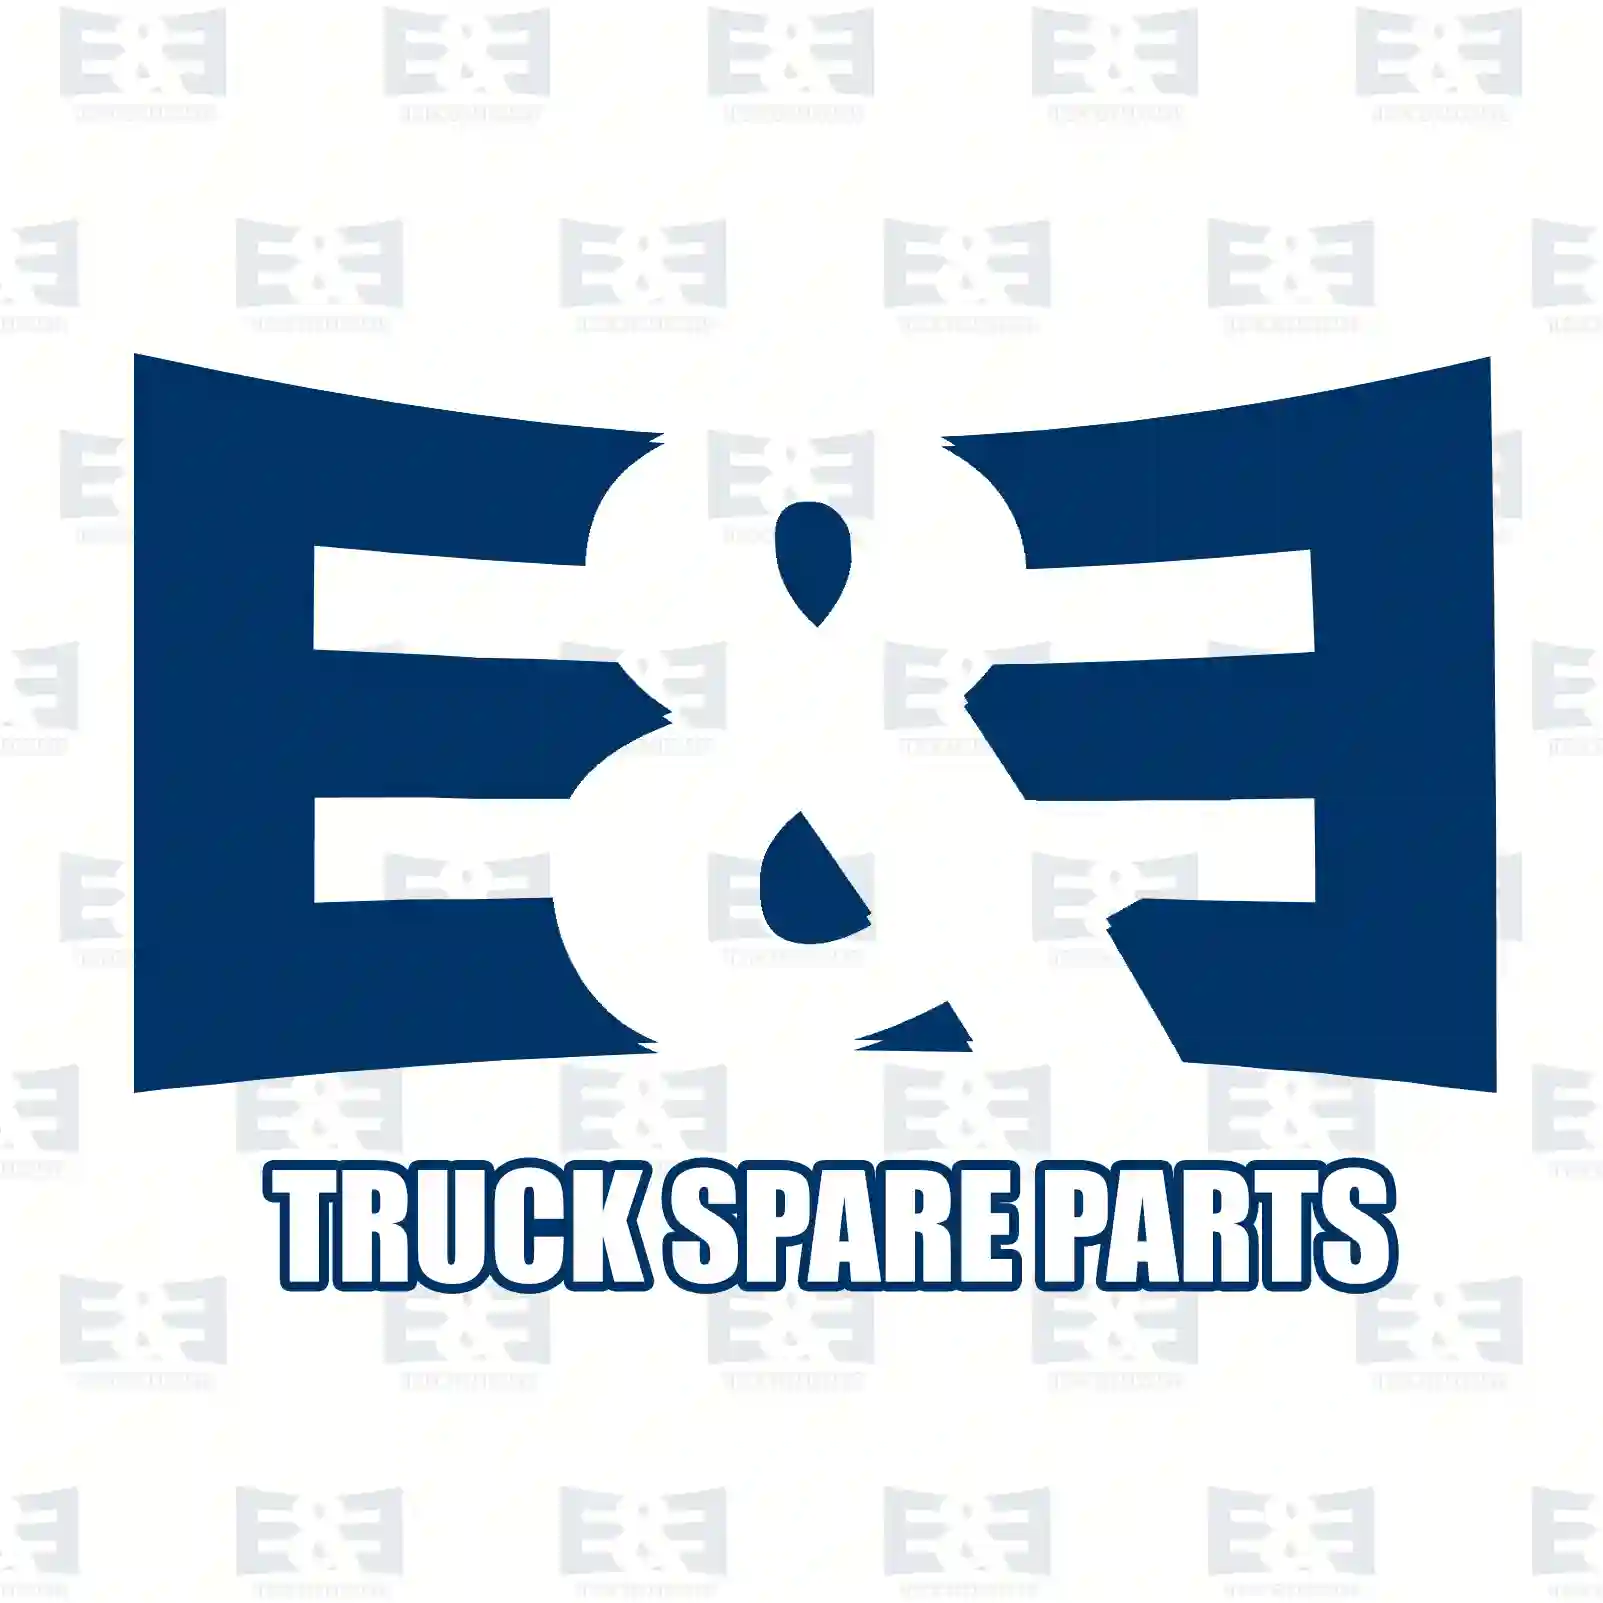 Exhaust System Exhaust manifold kit, EE No 2E2204197 ,  oem no:7403155036S, 1547520S, 1547521S, 3155036S, 3964707S, 3964708S, 8170972S, 8170973S, ZG10088-0008 E&E Truck Spare Parts | Truck Spare Parts, Auotomotive Spare Parts